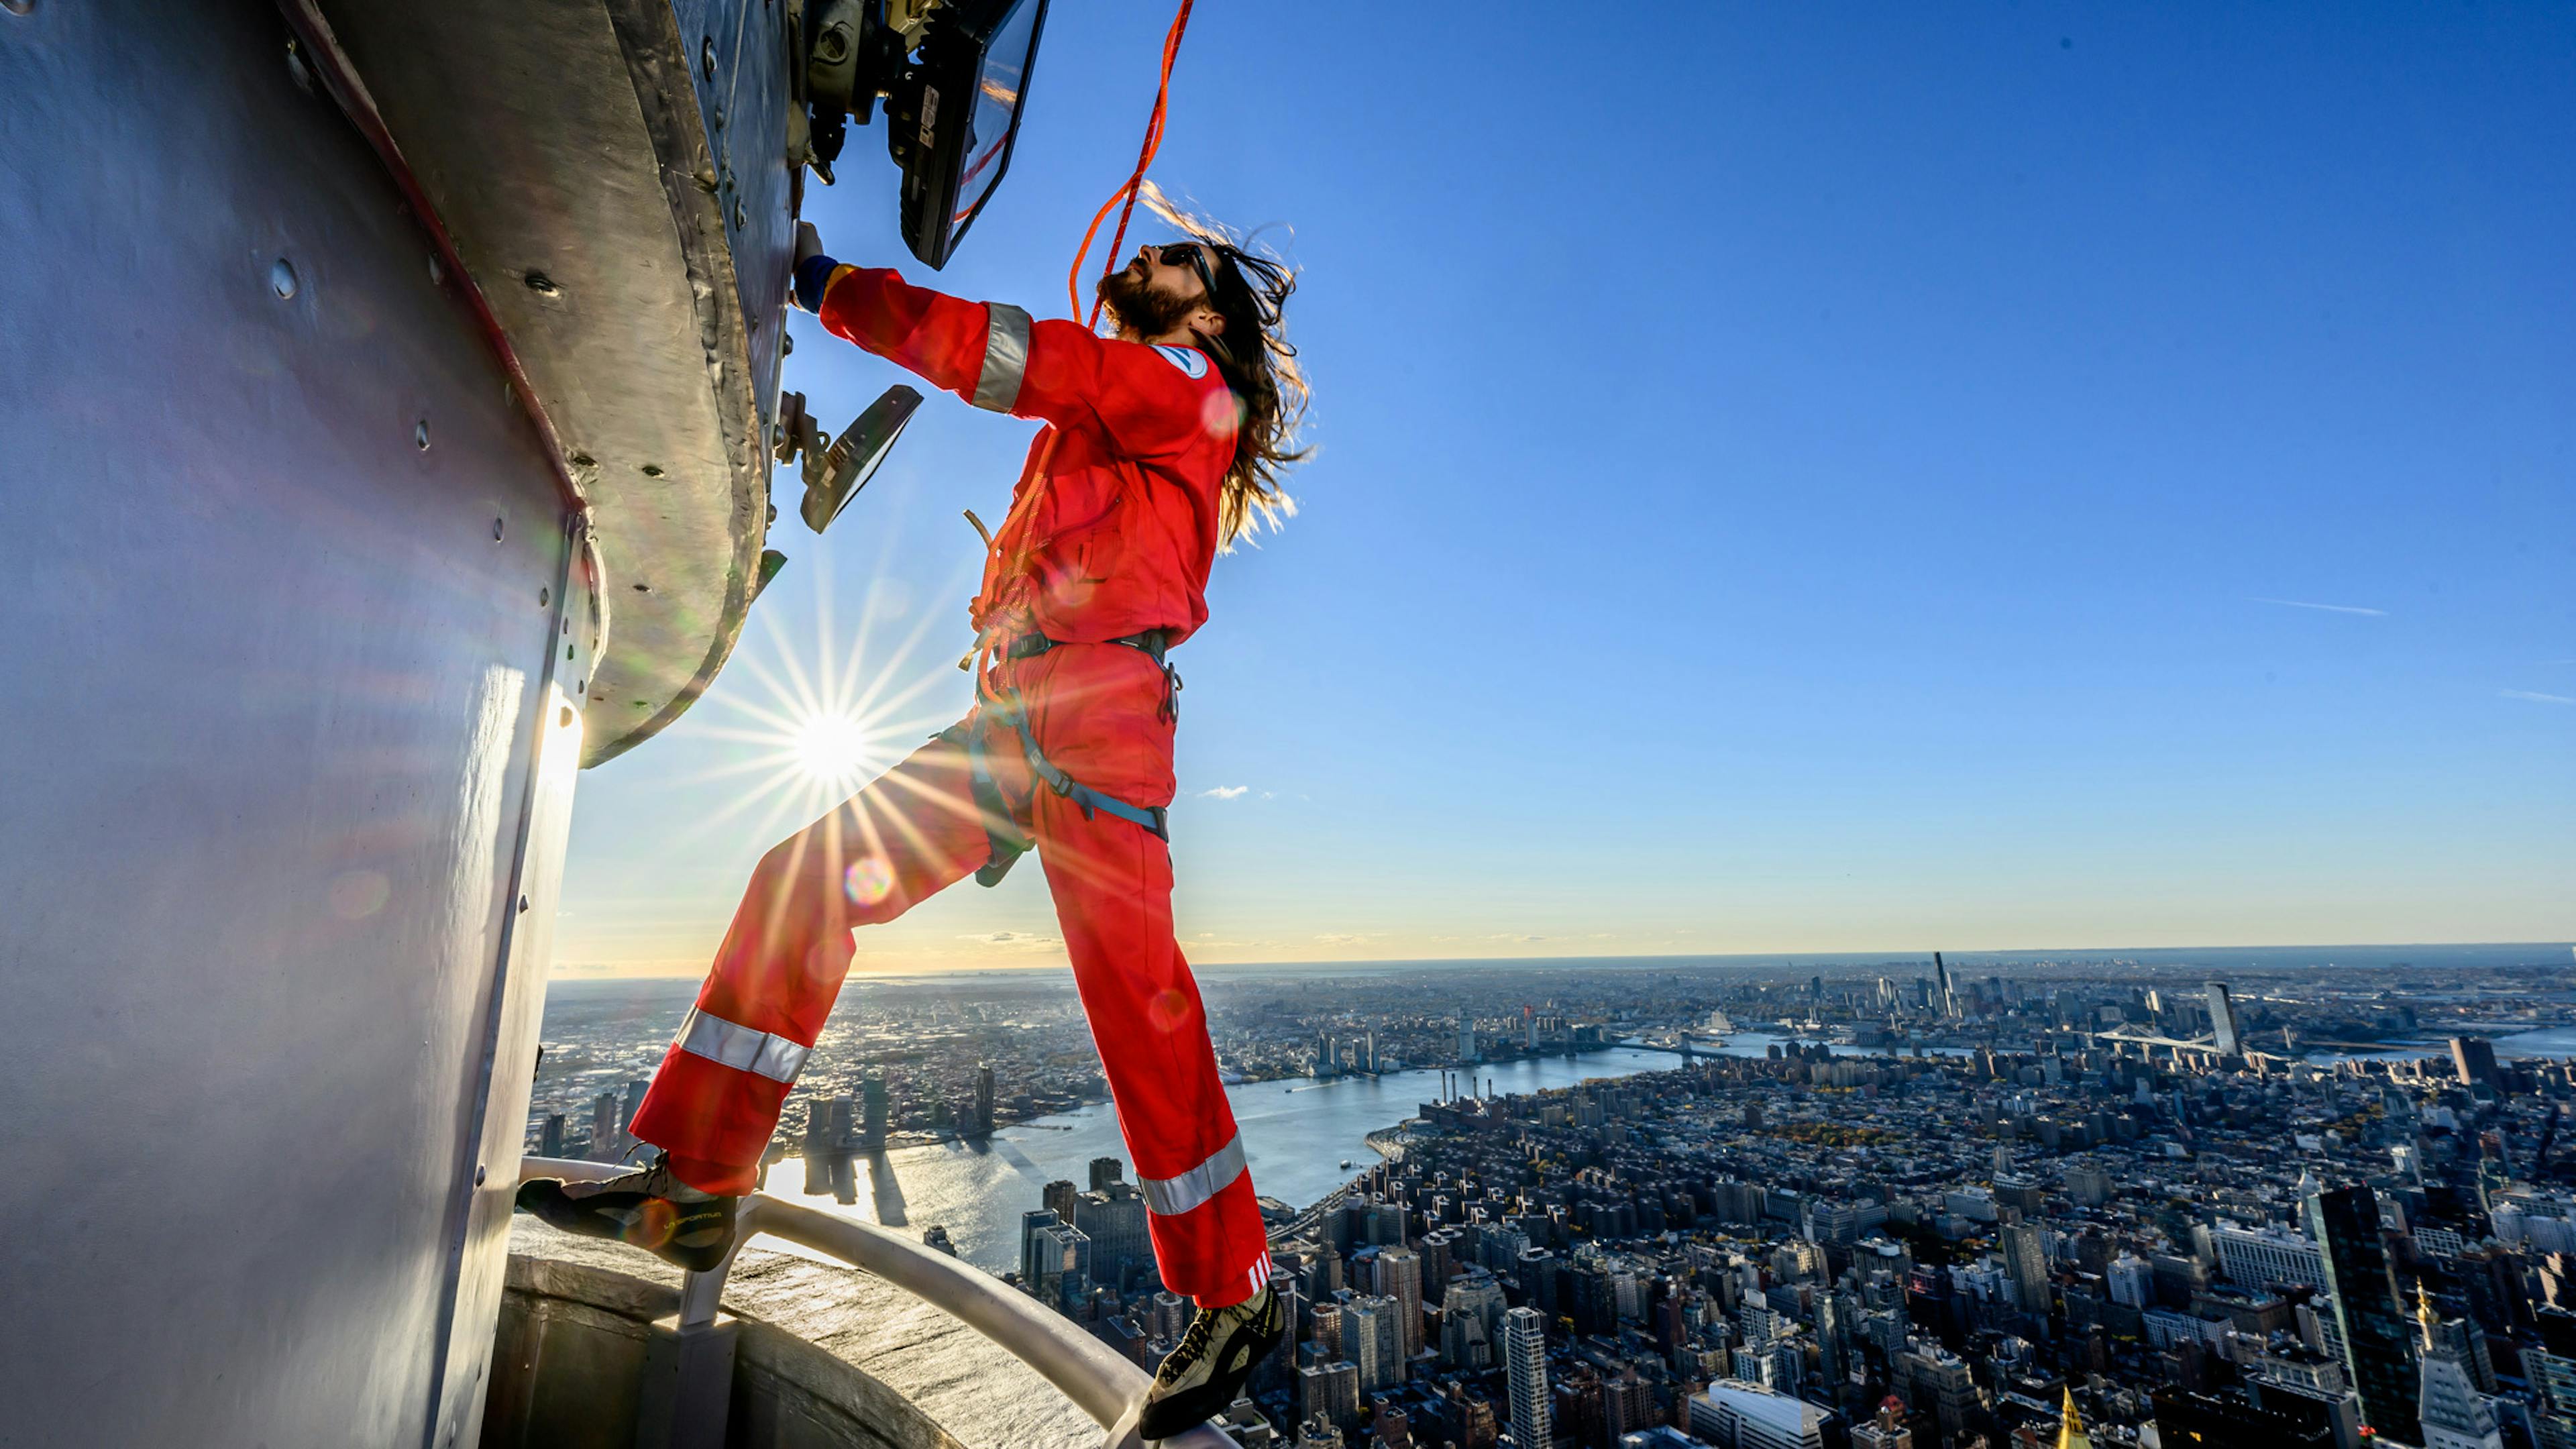 See Jared Leto complete the first-ever climb of the iconic Empire State Building